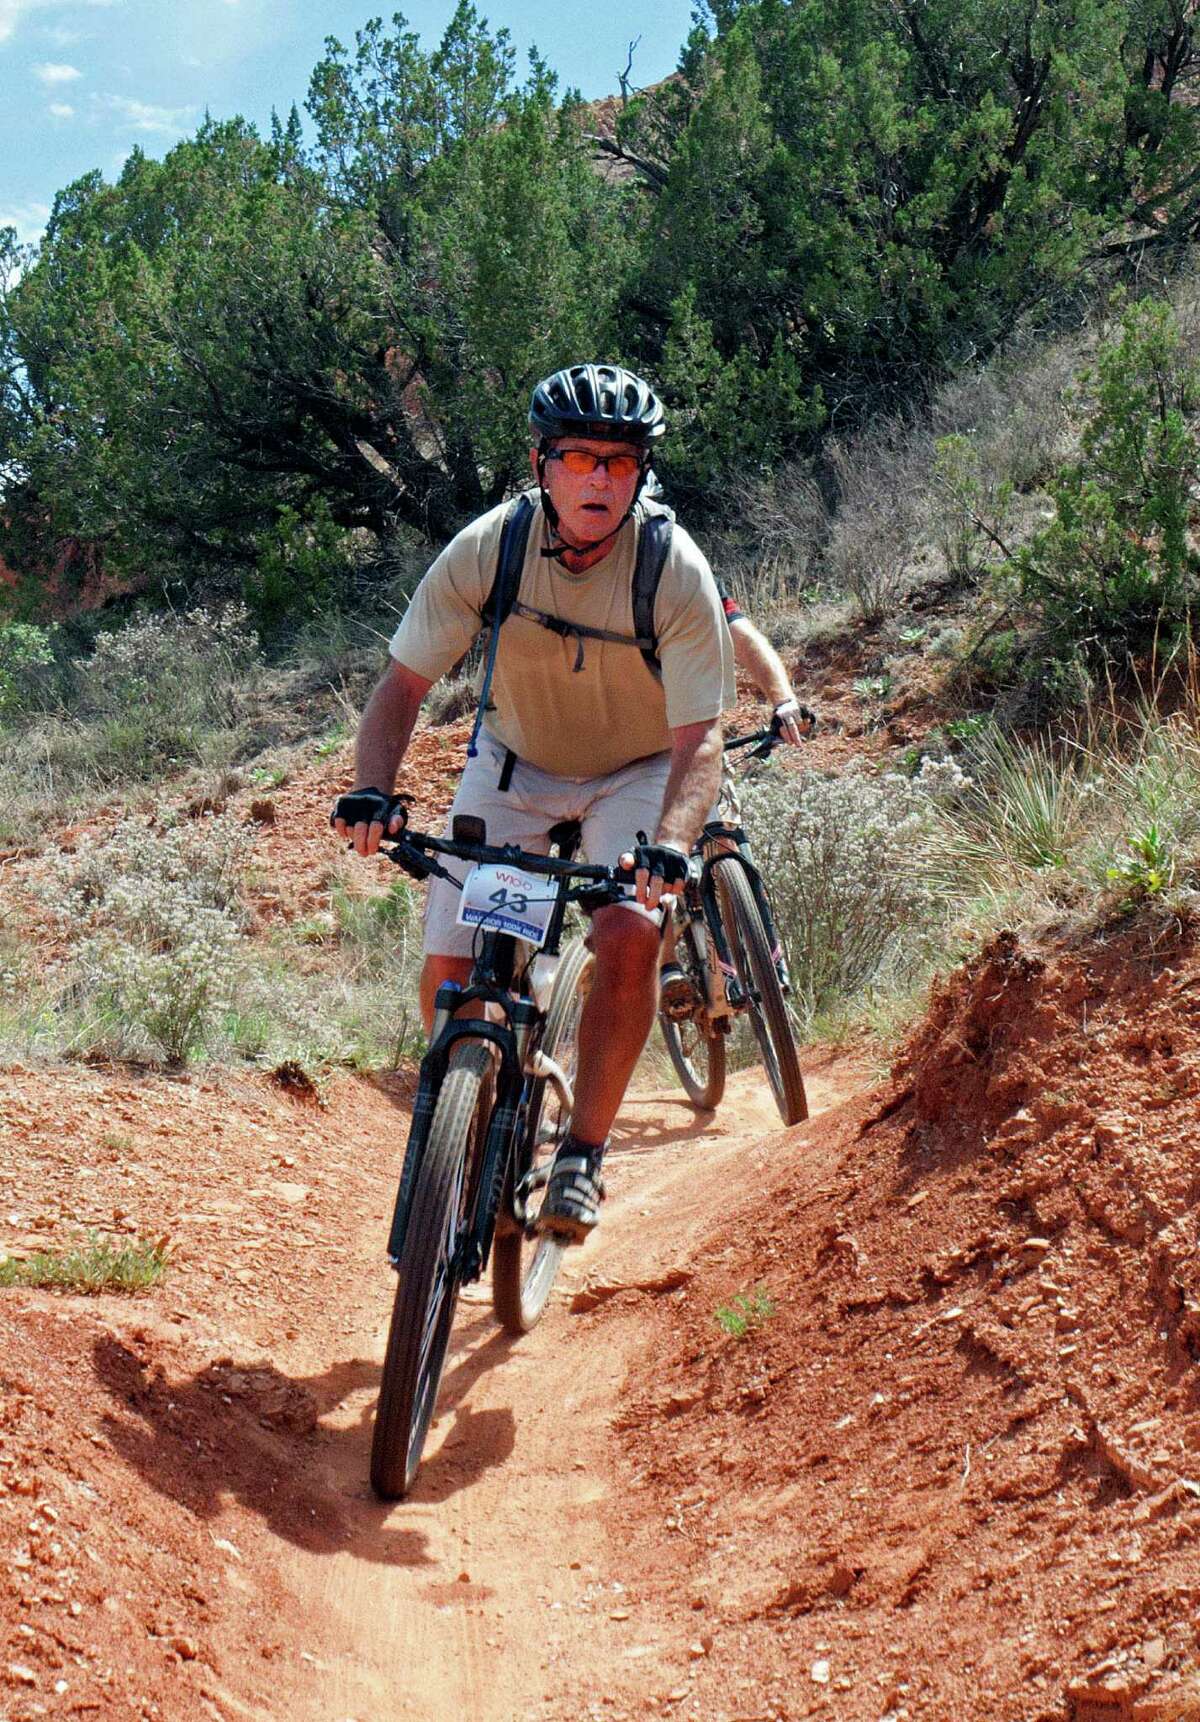 Former President George W. Bush leads the way along one of the many biking trails at Palo Duro Canyon State Park.